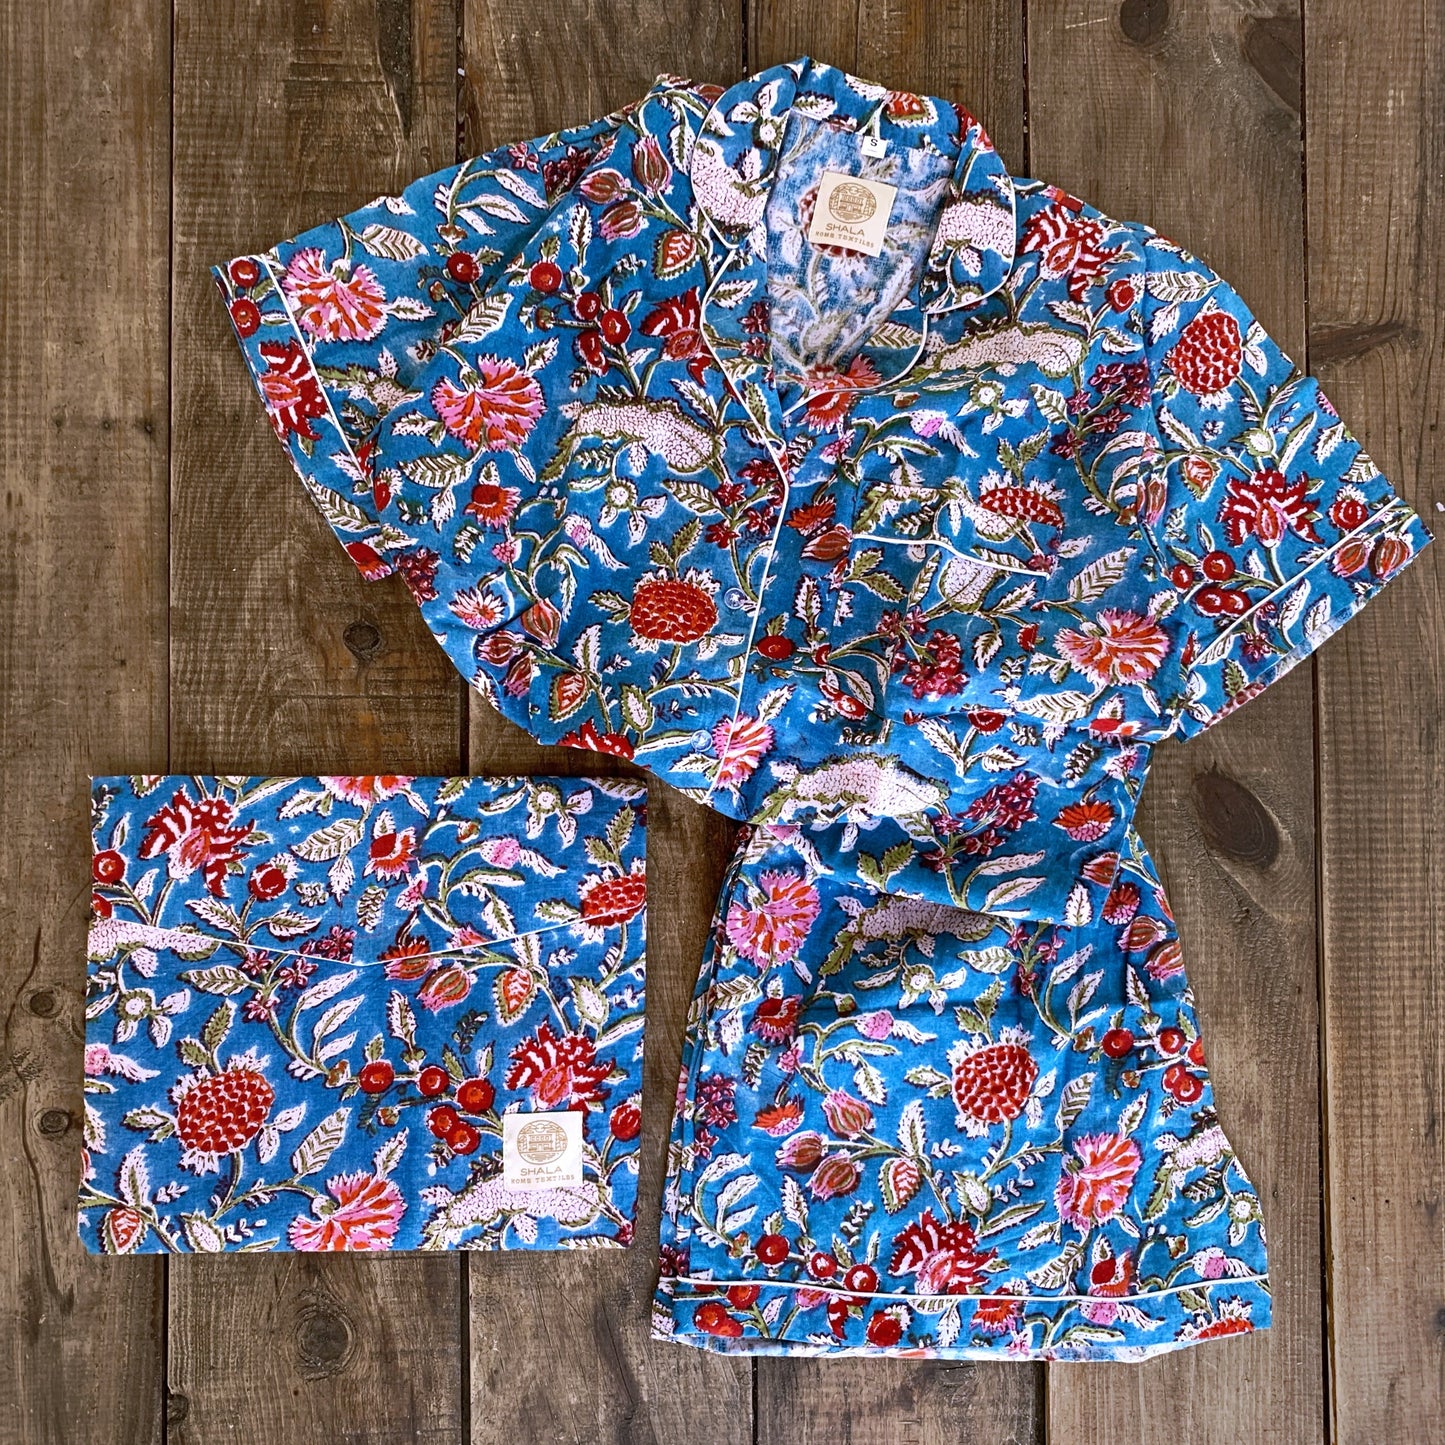 Gift SET Pajamas with sleeves/shorts and matching slippers Pure cotton block print handmade in India Blue red flowers